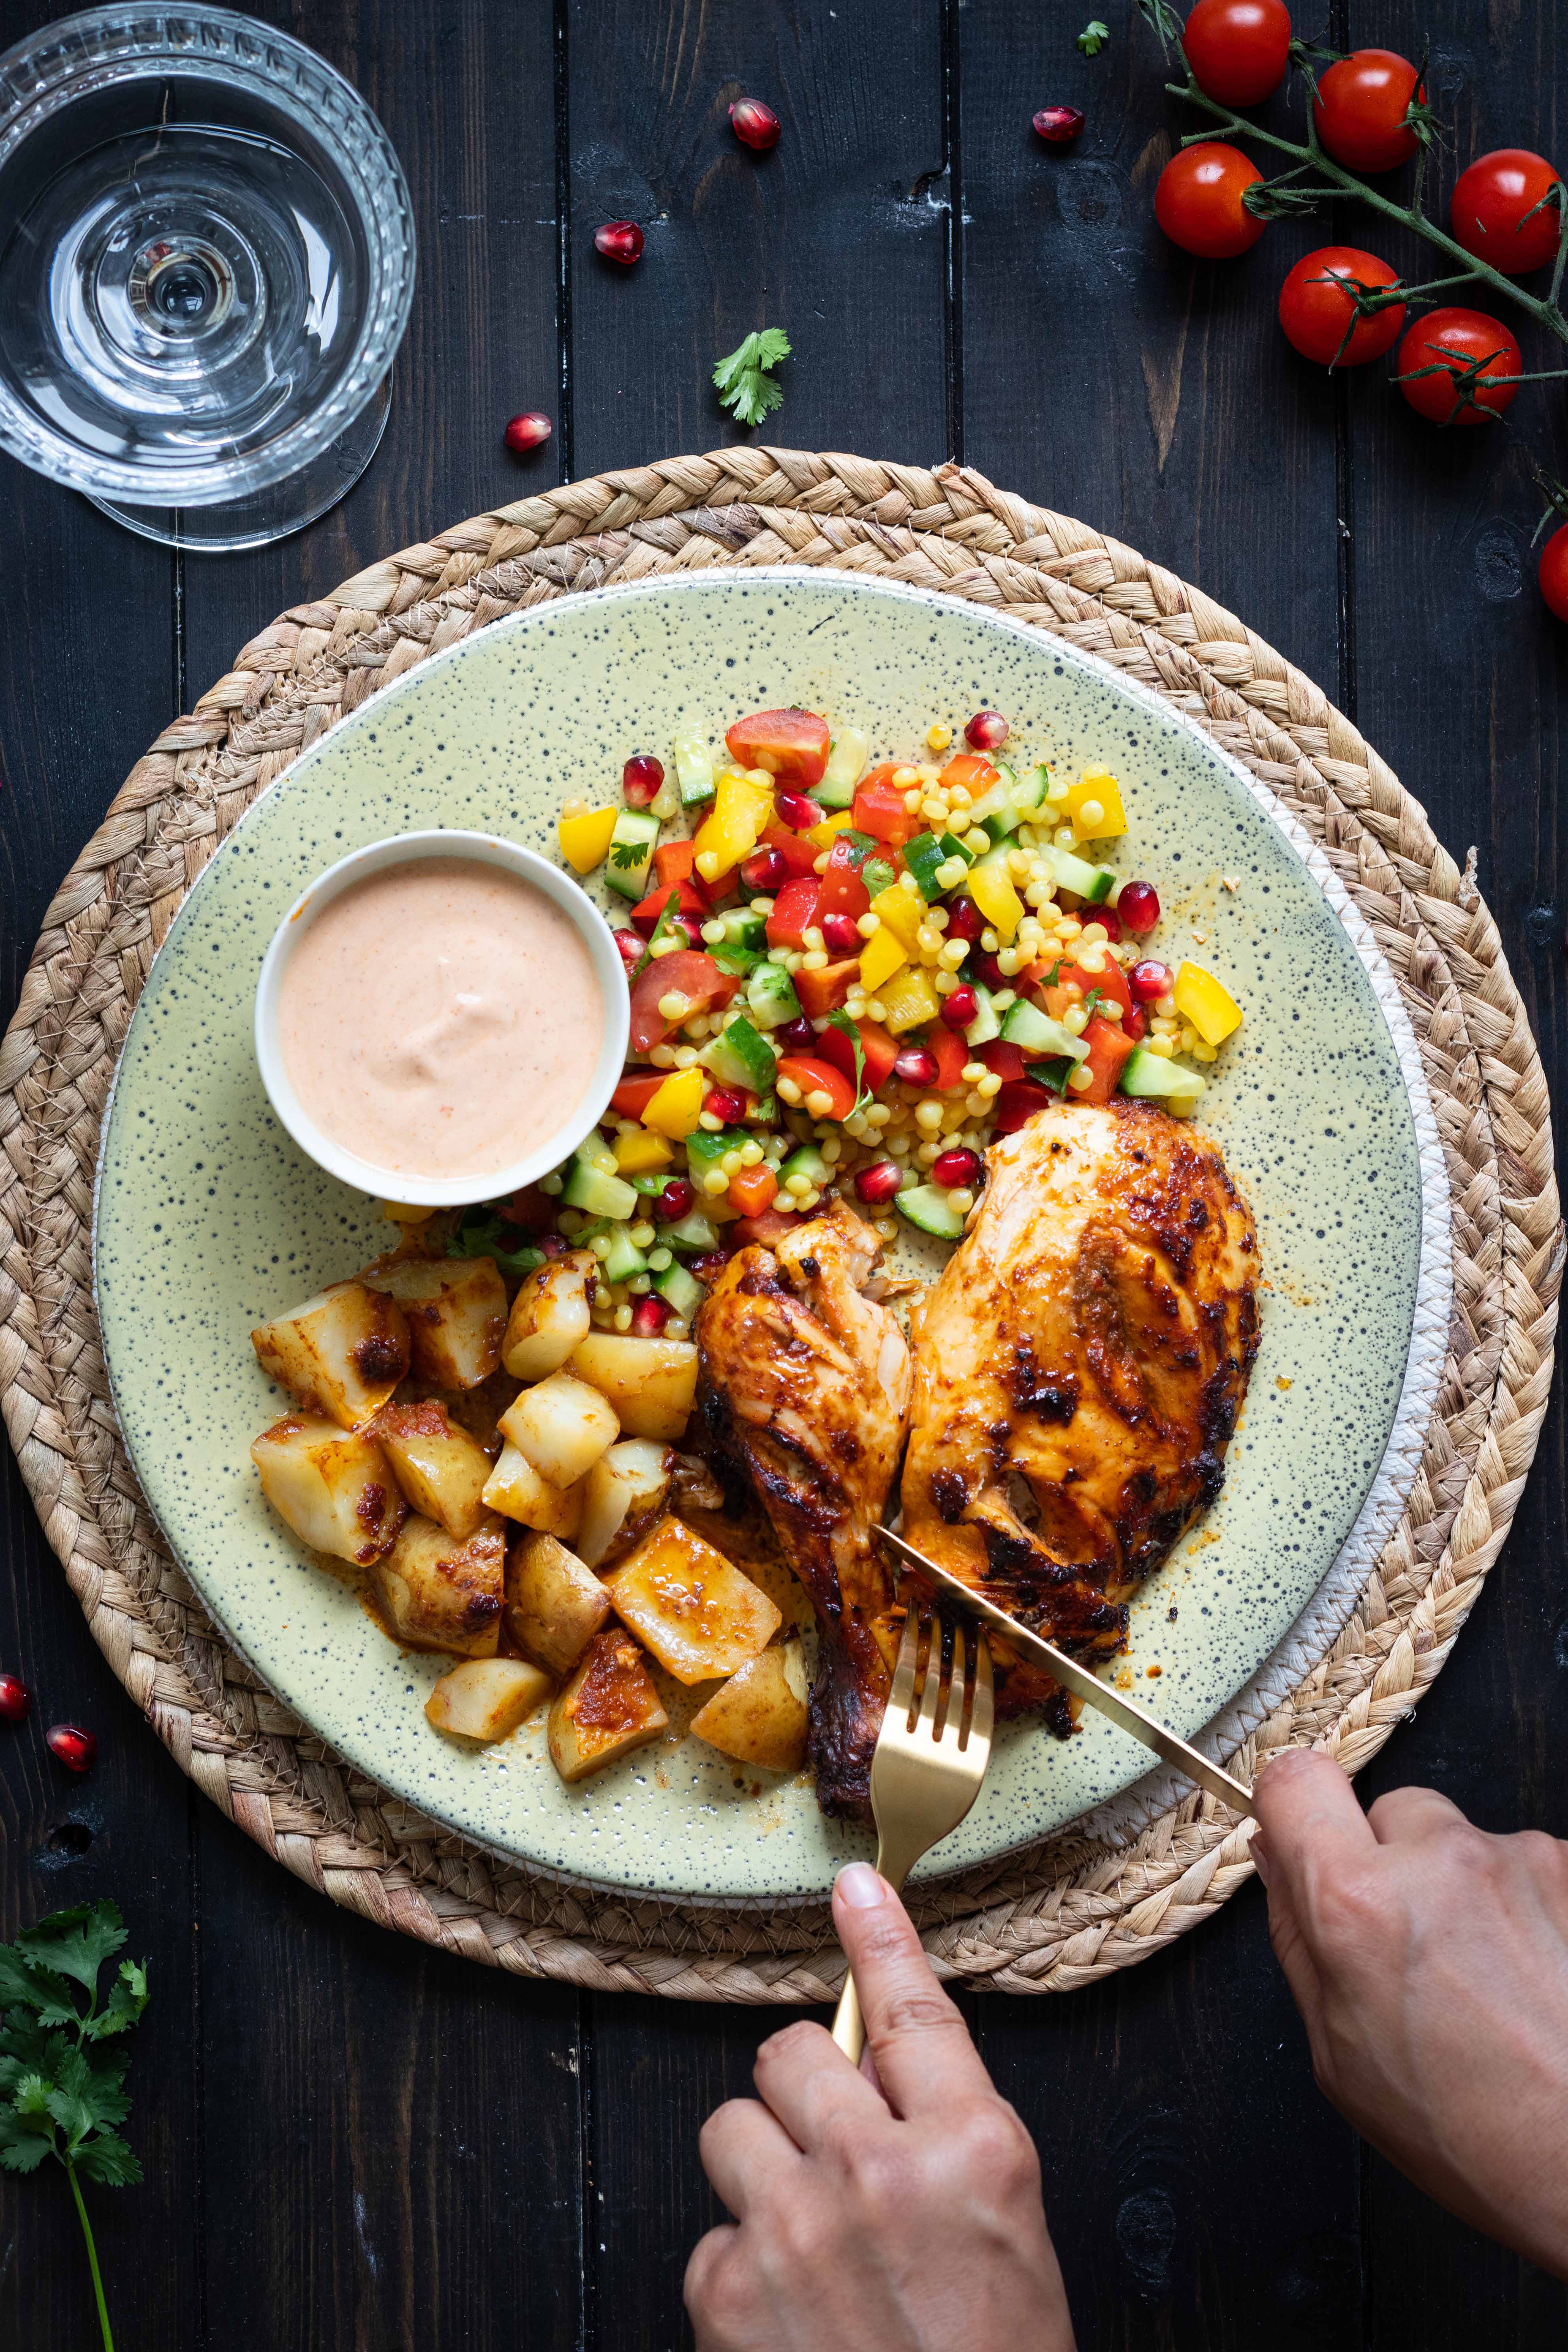 Harissa grilled chicken with Israeli couscous salad